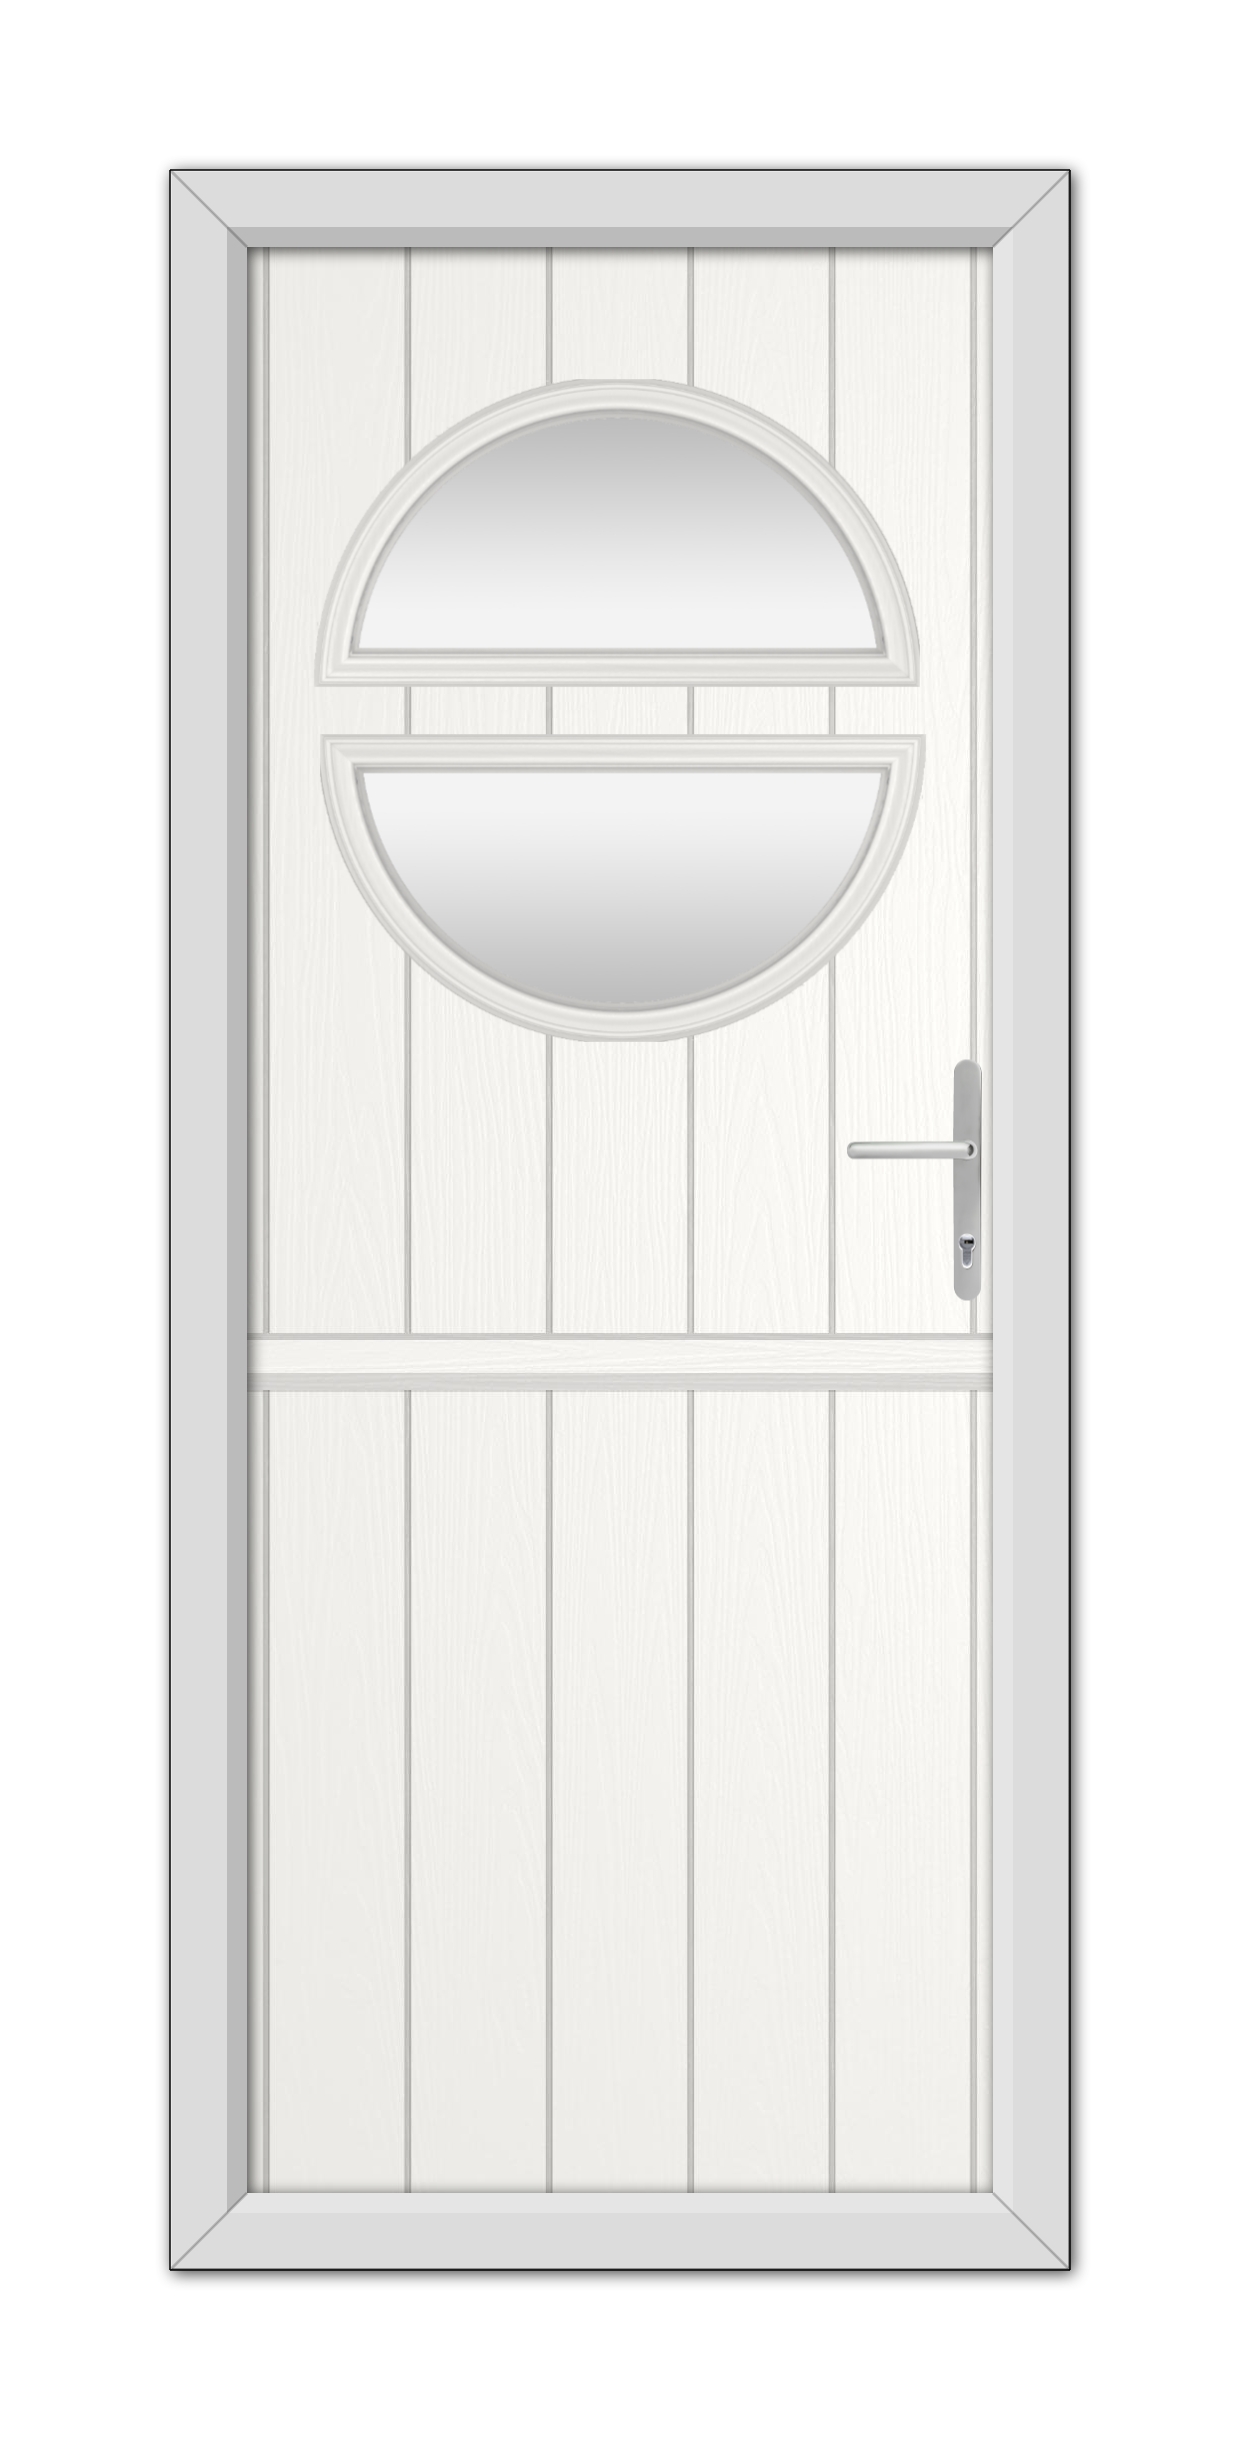 A modern White Kent Stable Composite Door 48mm Timber Core with an oval-shaped glass window at the top and a metal handle on the right side.